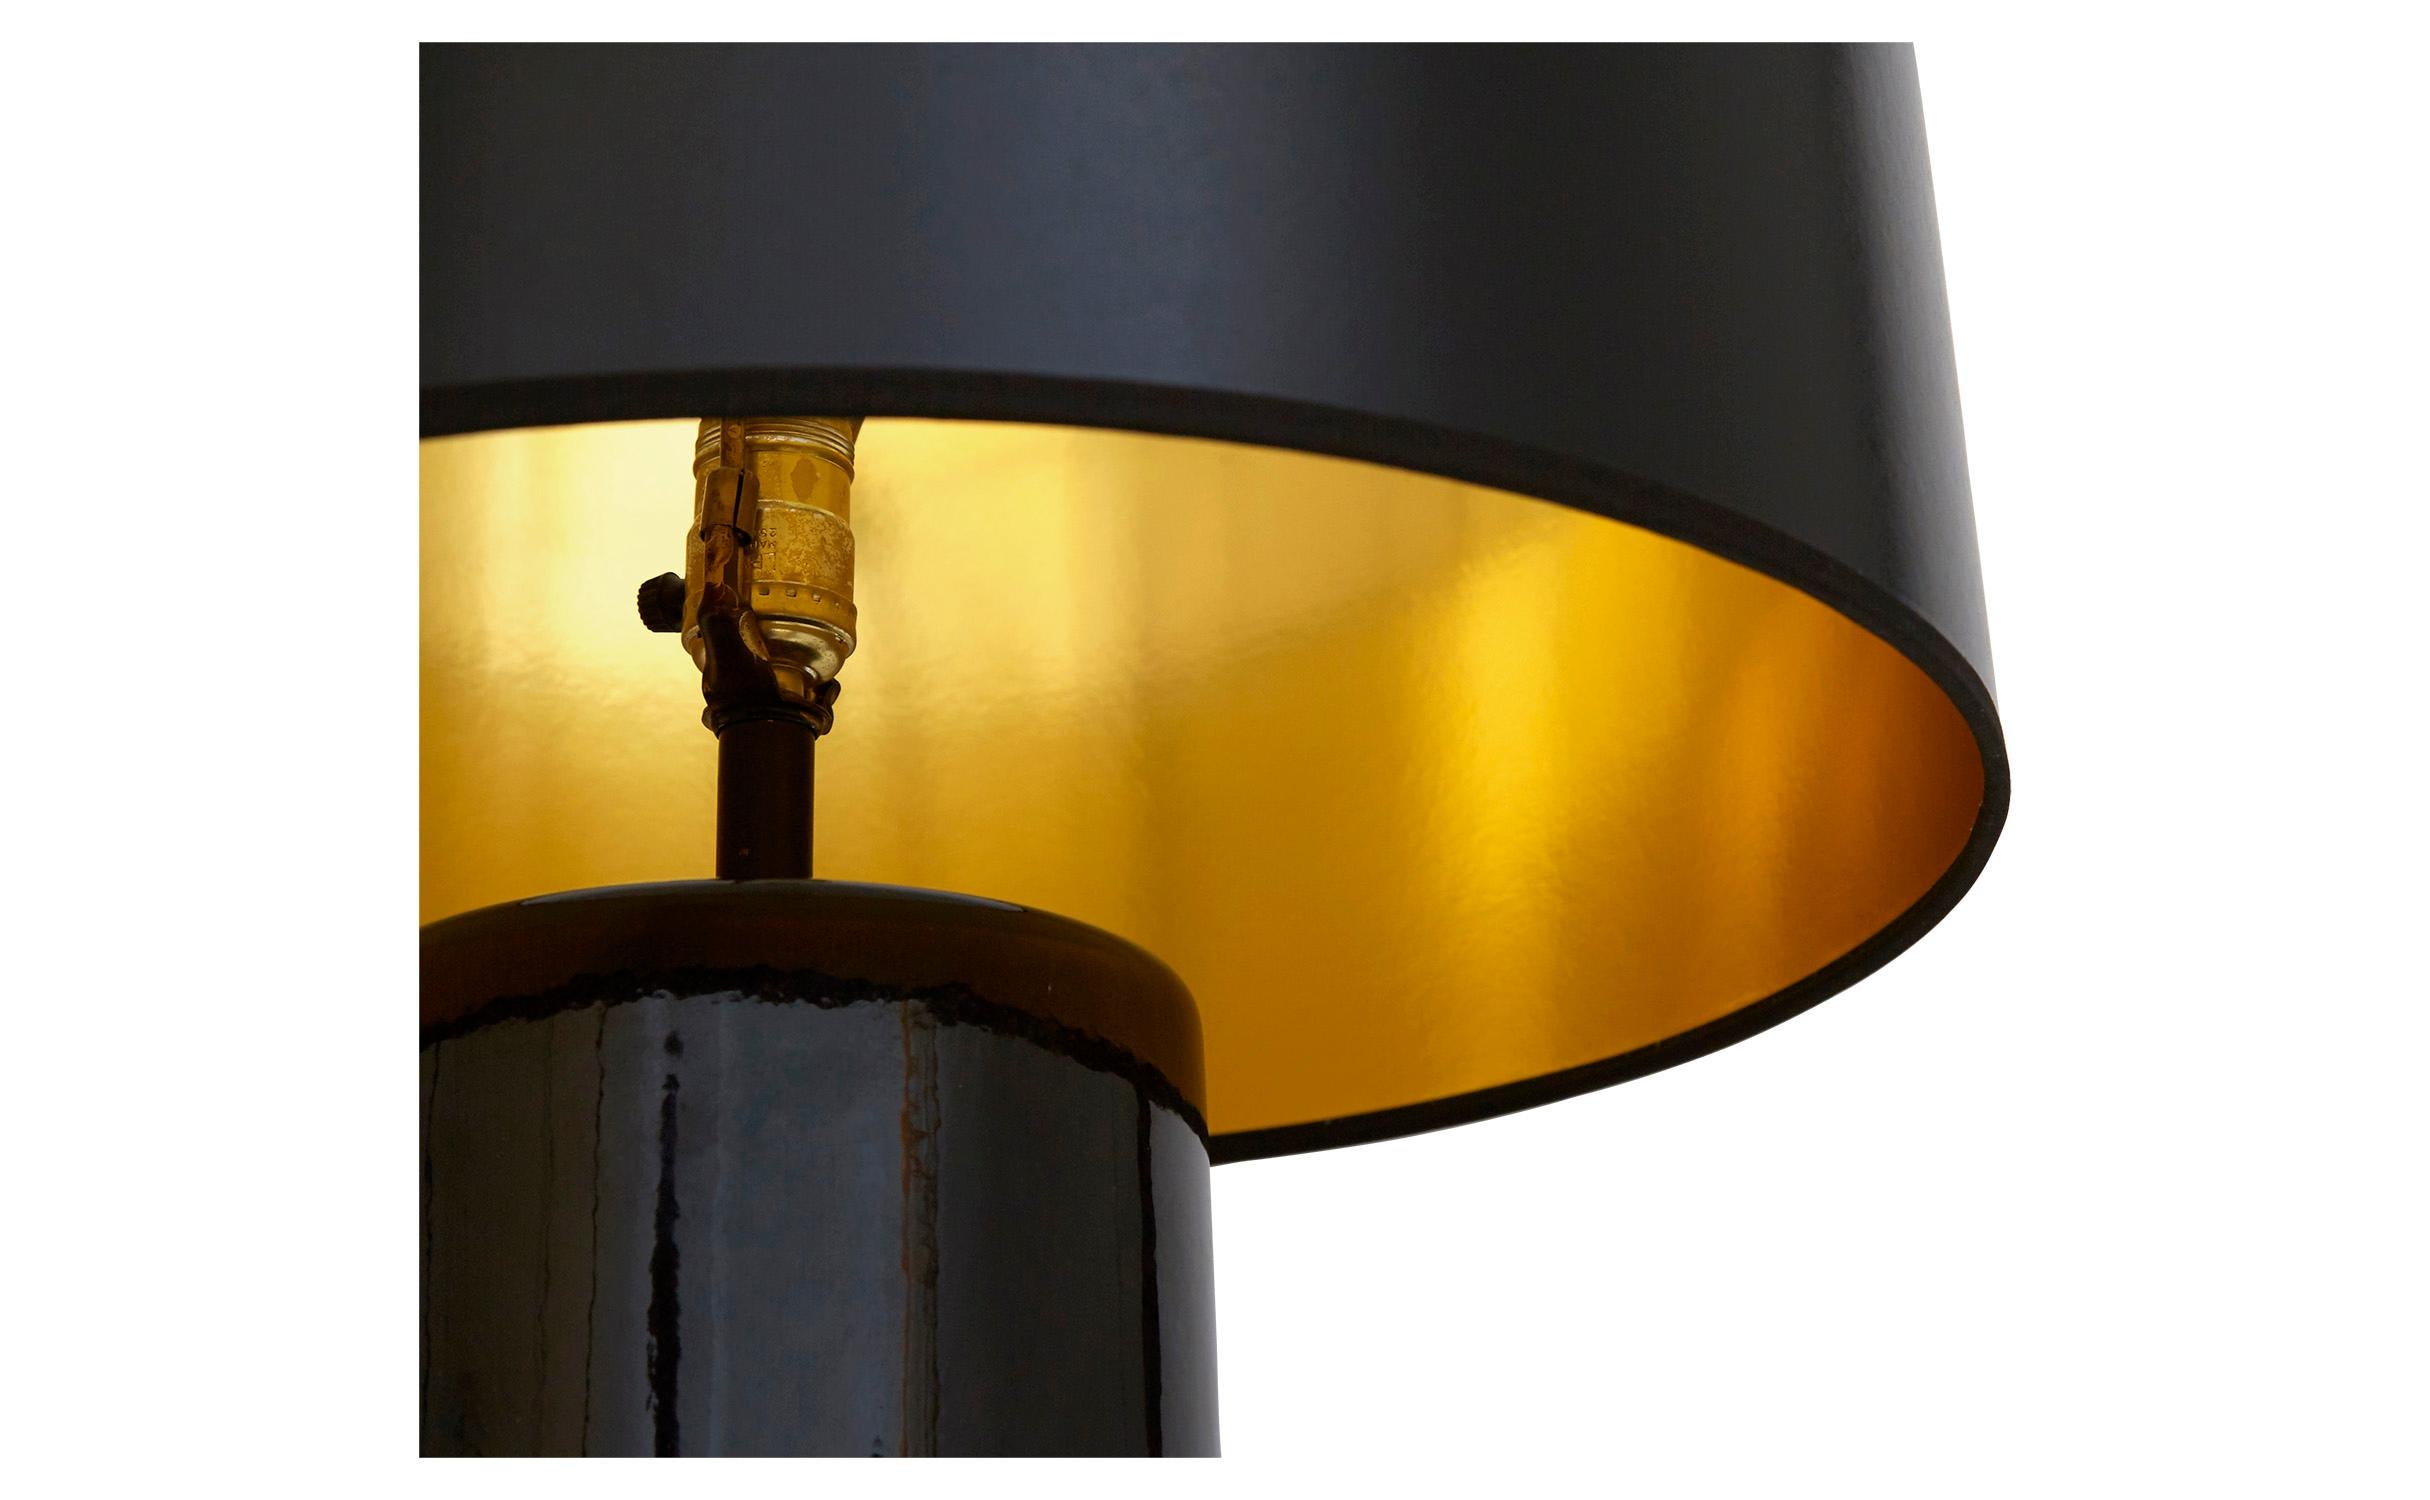 Our vintage black table lamp was crafted in America in the mid-20th century. It features a cylindrical ceramic base finished with a glossy black glaze and paired with a black paper shade with a gold interior. Newly rewired, we’ve paired it with a